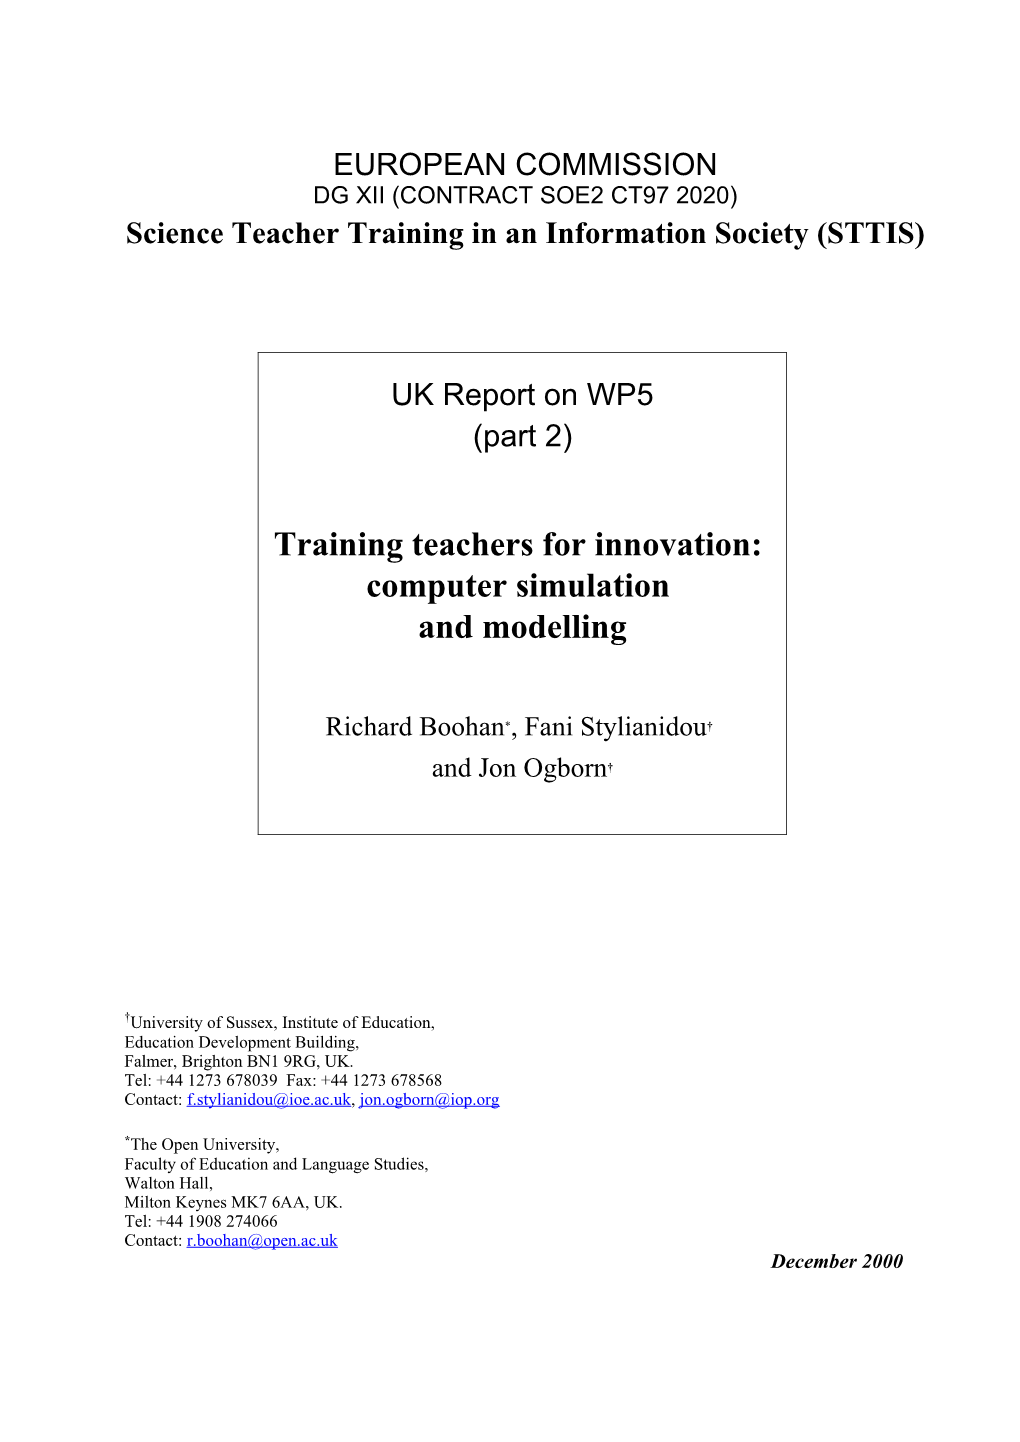 Science Teacher Training in an Information Society